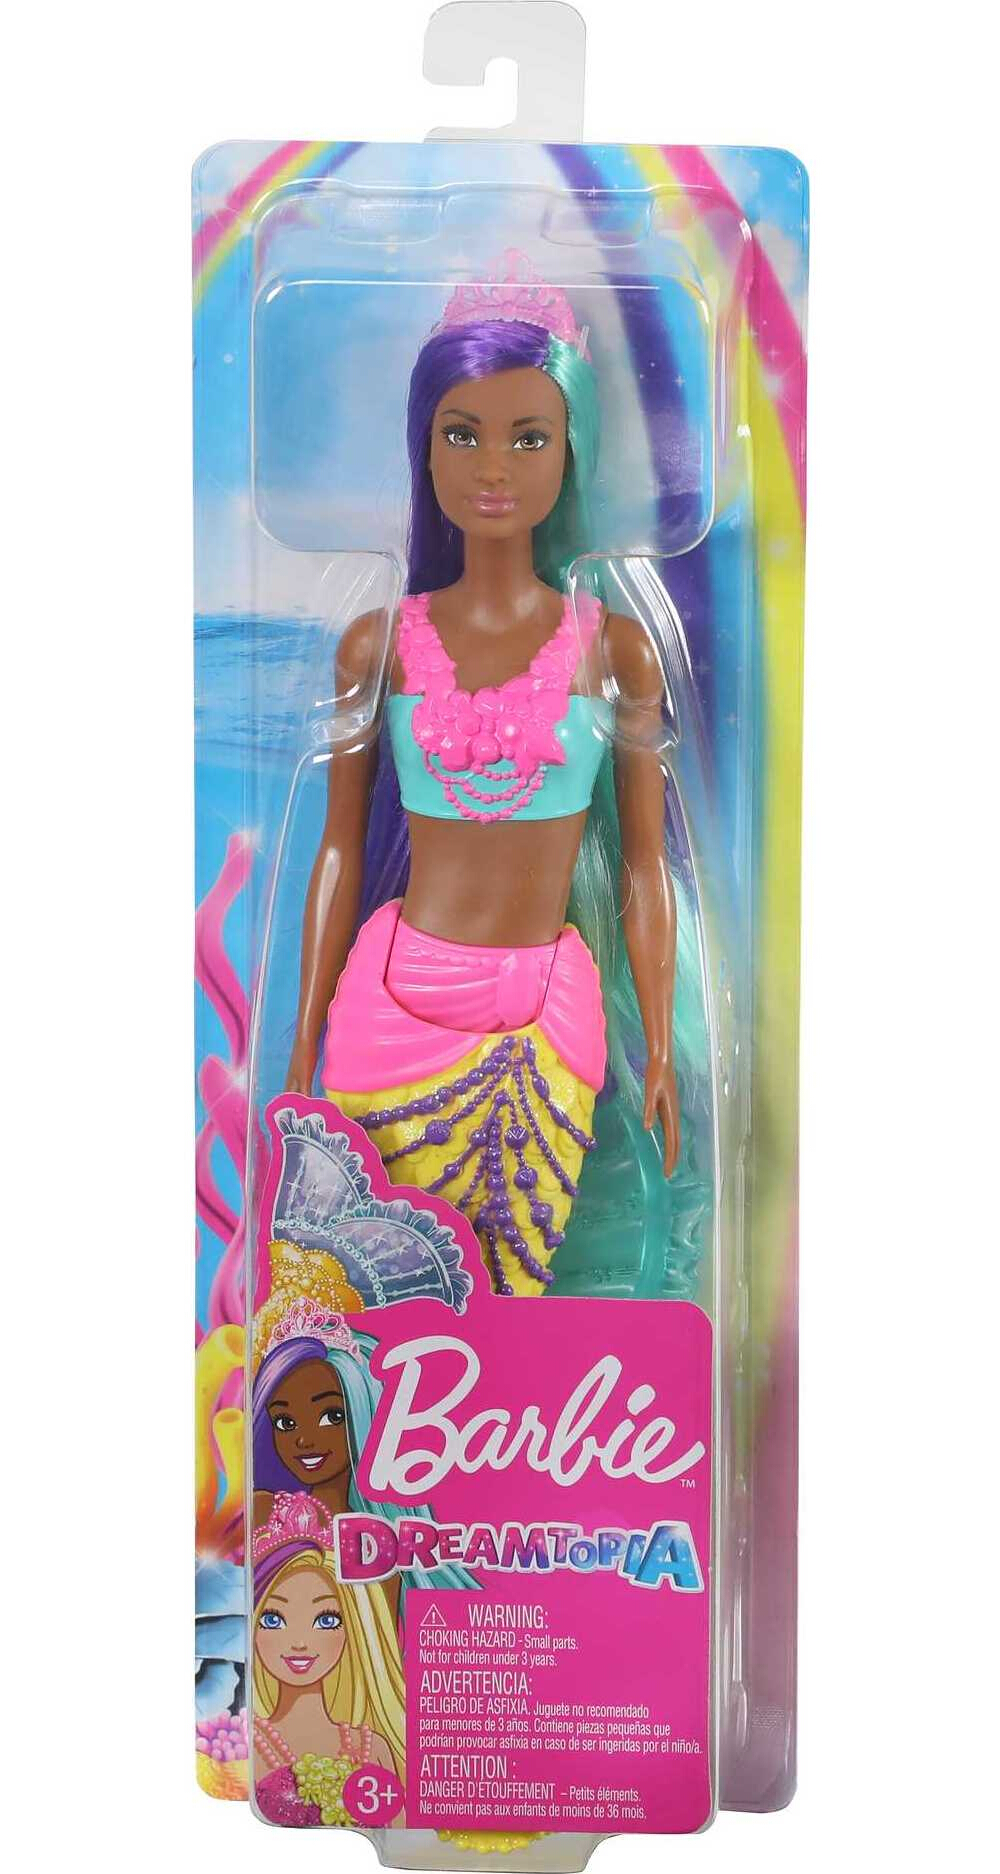 Barbie Dreamtopia Mermaid Doll with Teal & Purple Hair, Yellow Tail & Tiara Accessory - image 6 of 6